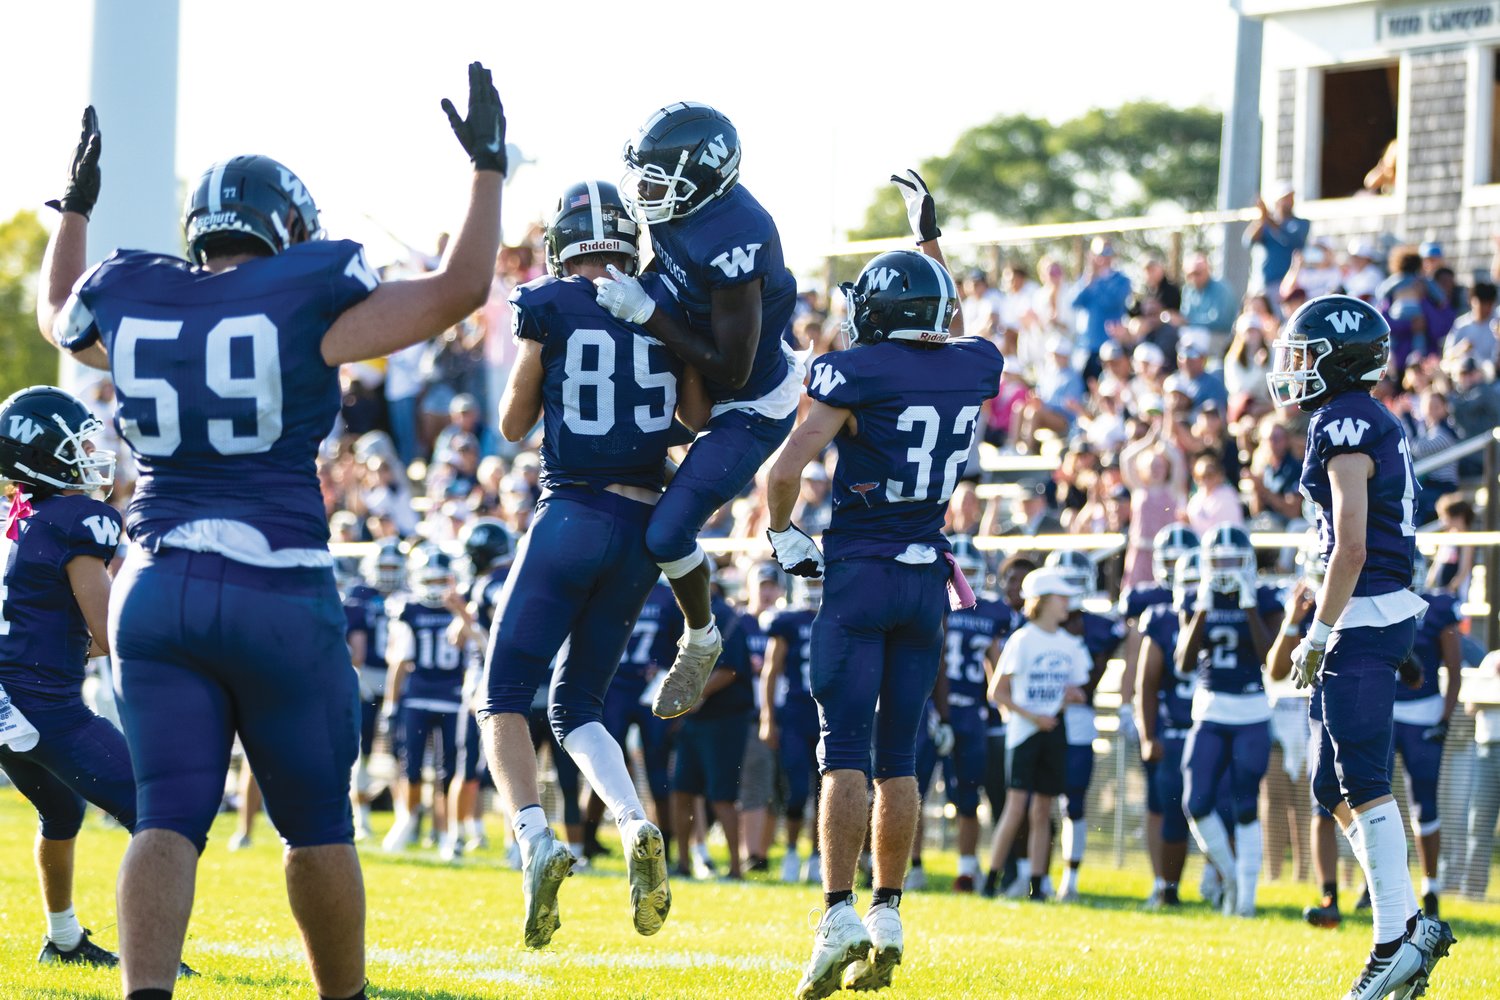 The Whalers celebrate a second-half touchdown run in front of a packed house Saturday in the football team’s home opener, a 29-28 loss to Mashpee.